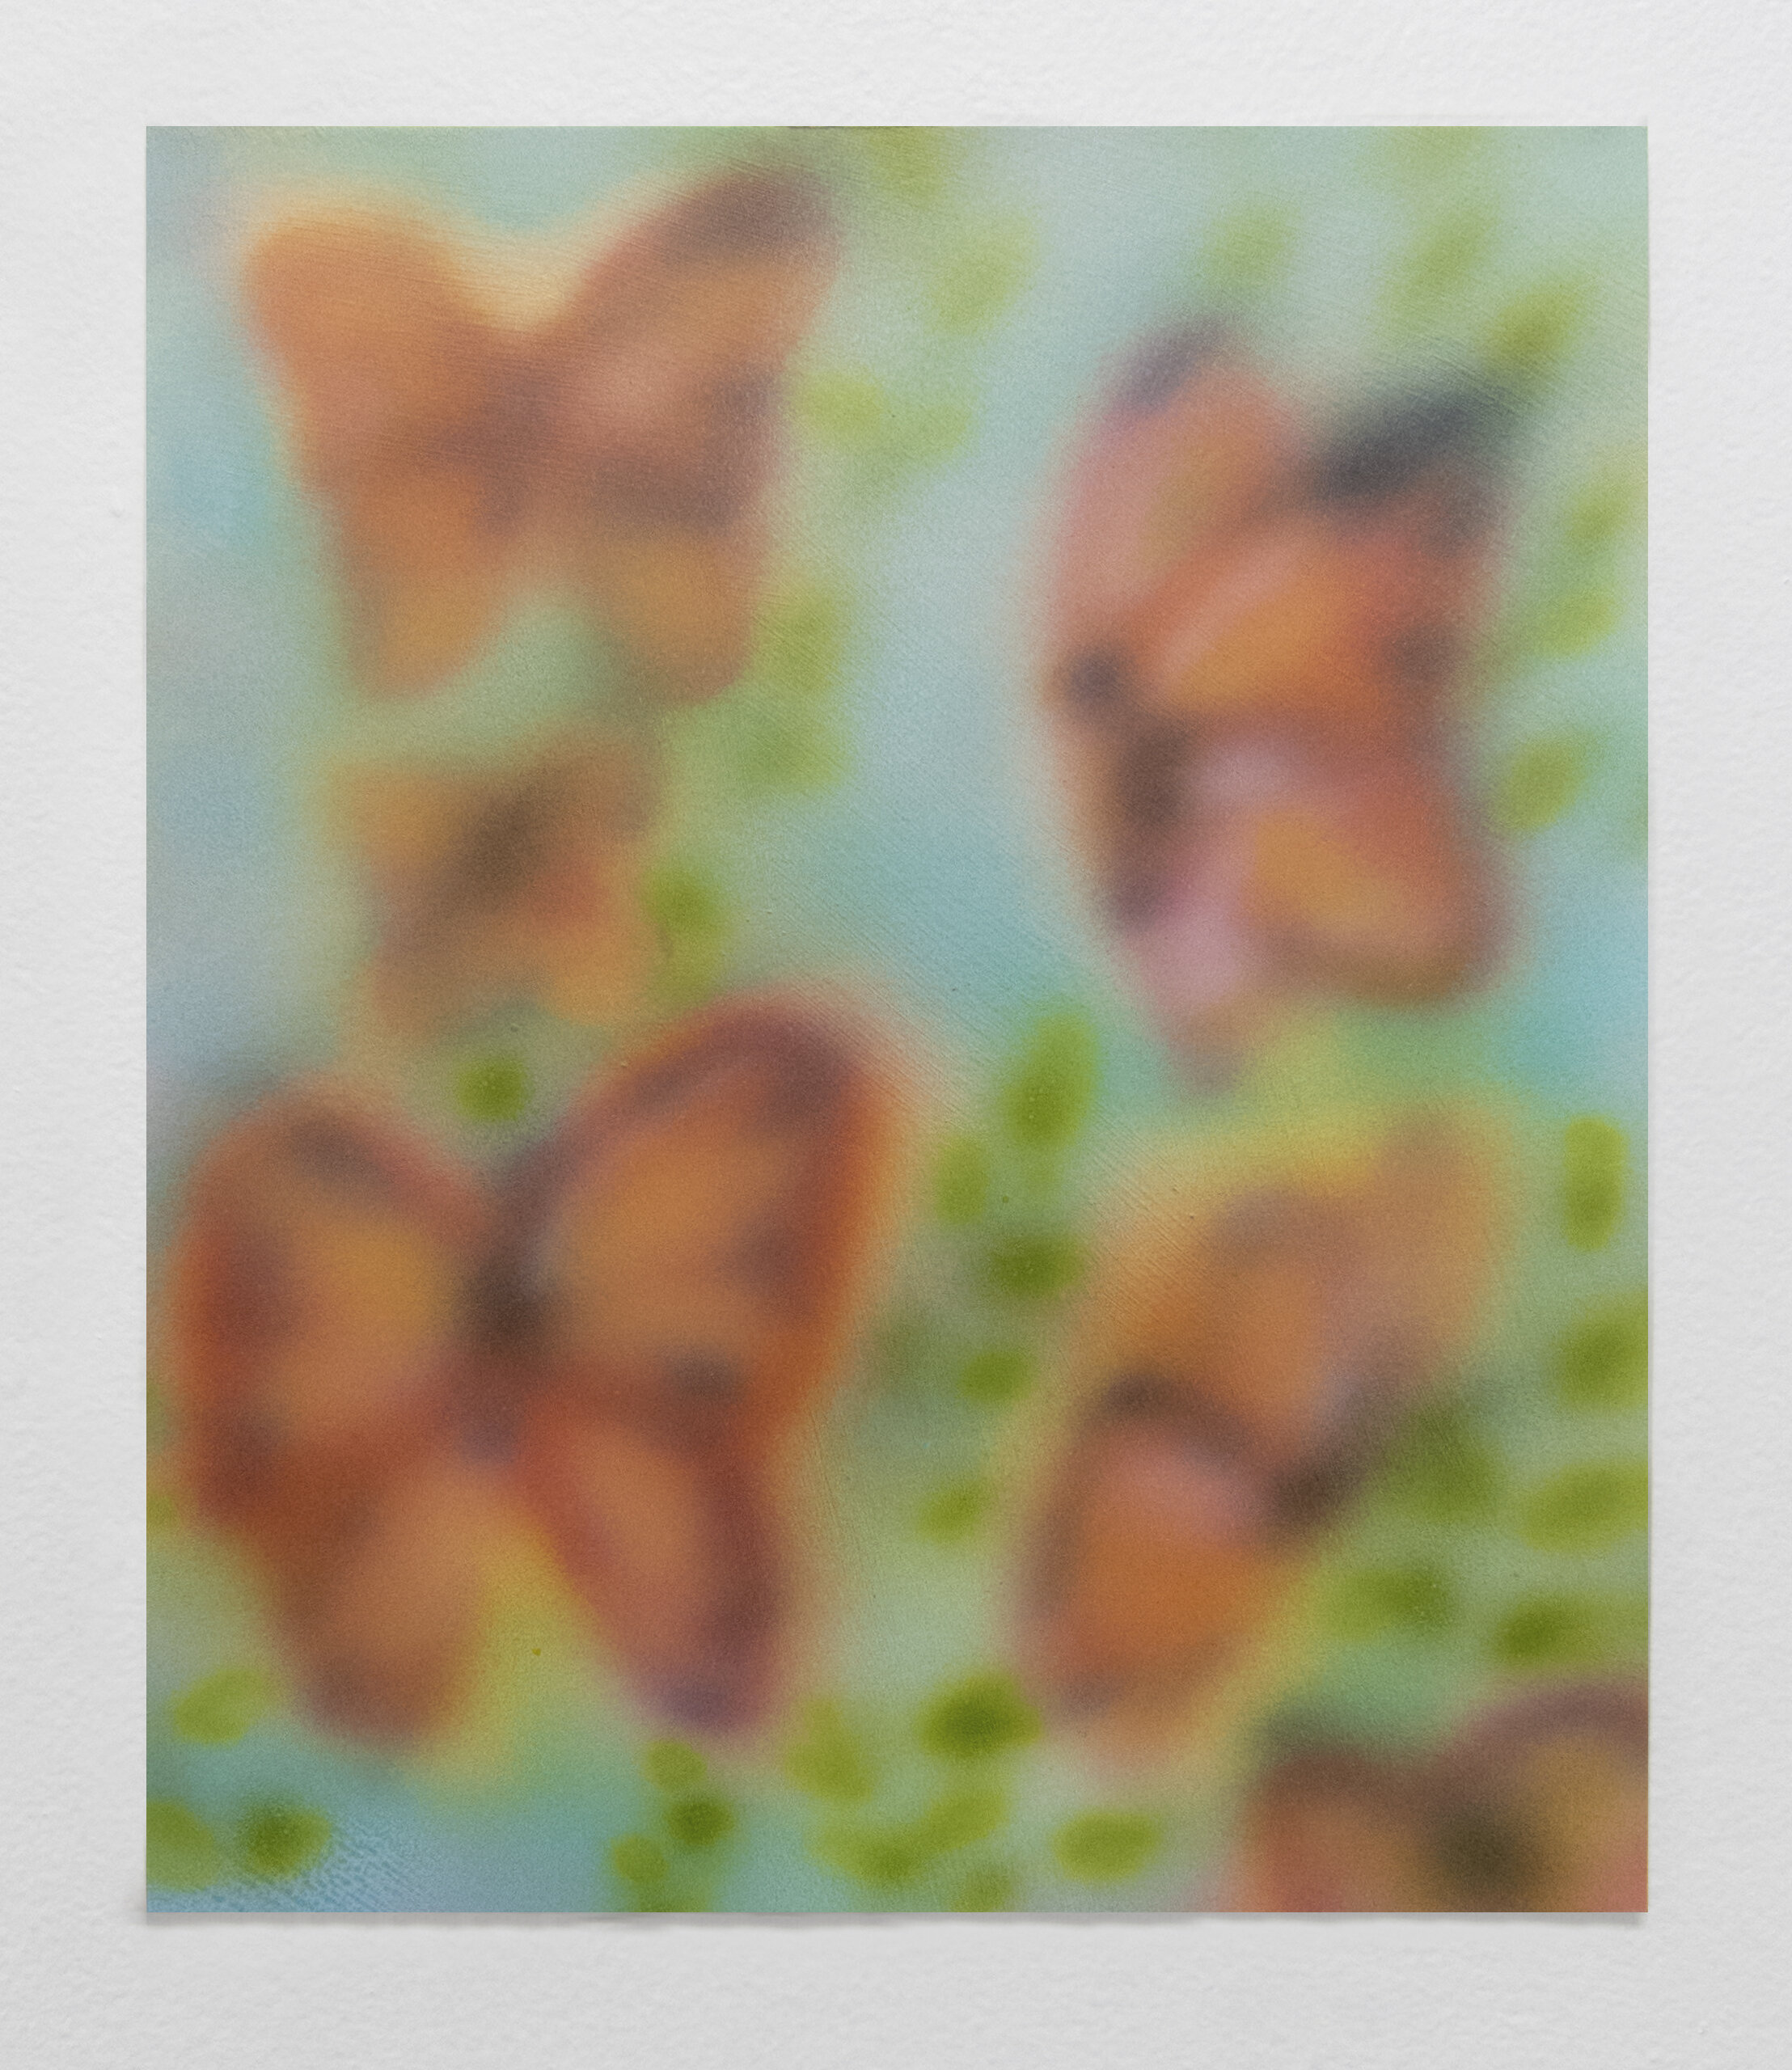 Untitled (Small Butterflies)